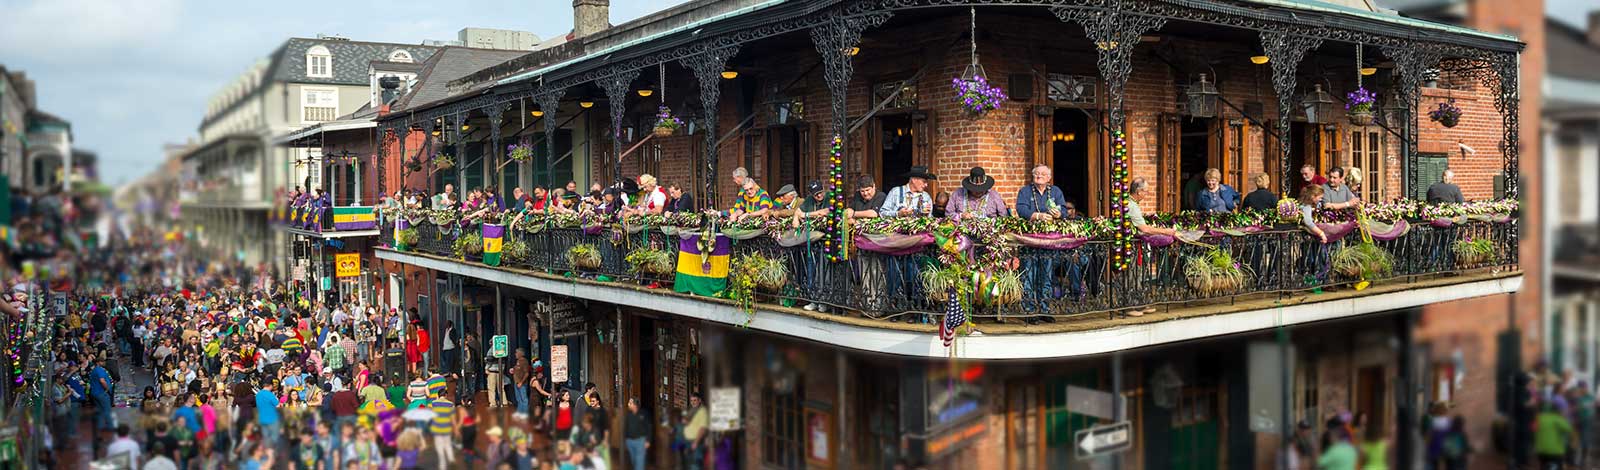 Hot Dogs Aren't Just for July 4th | Mardi Gras New Orleans